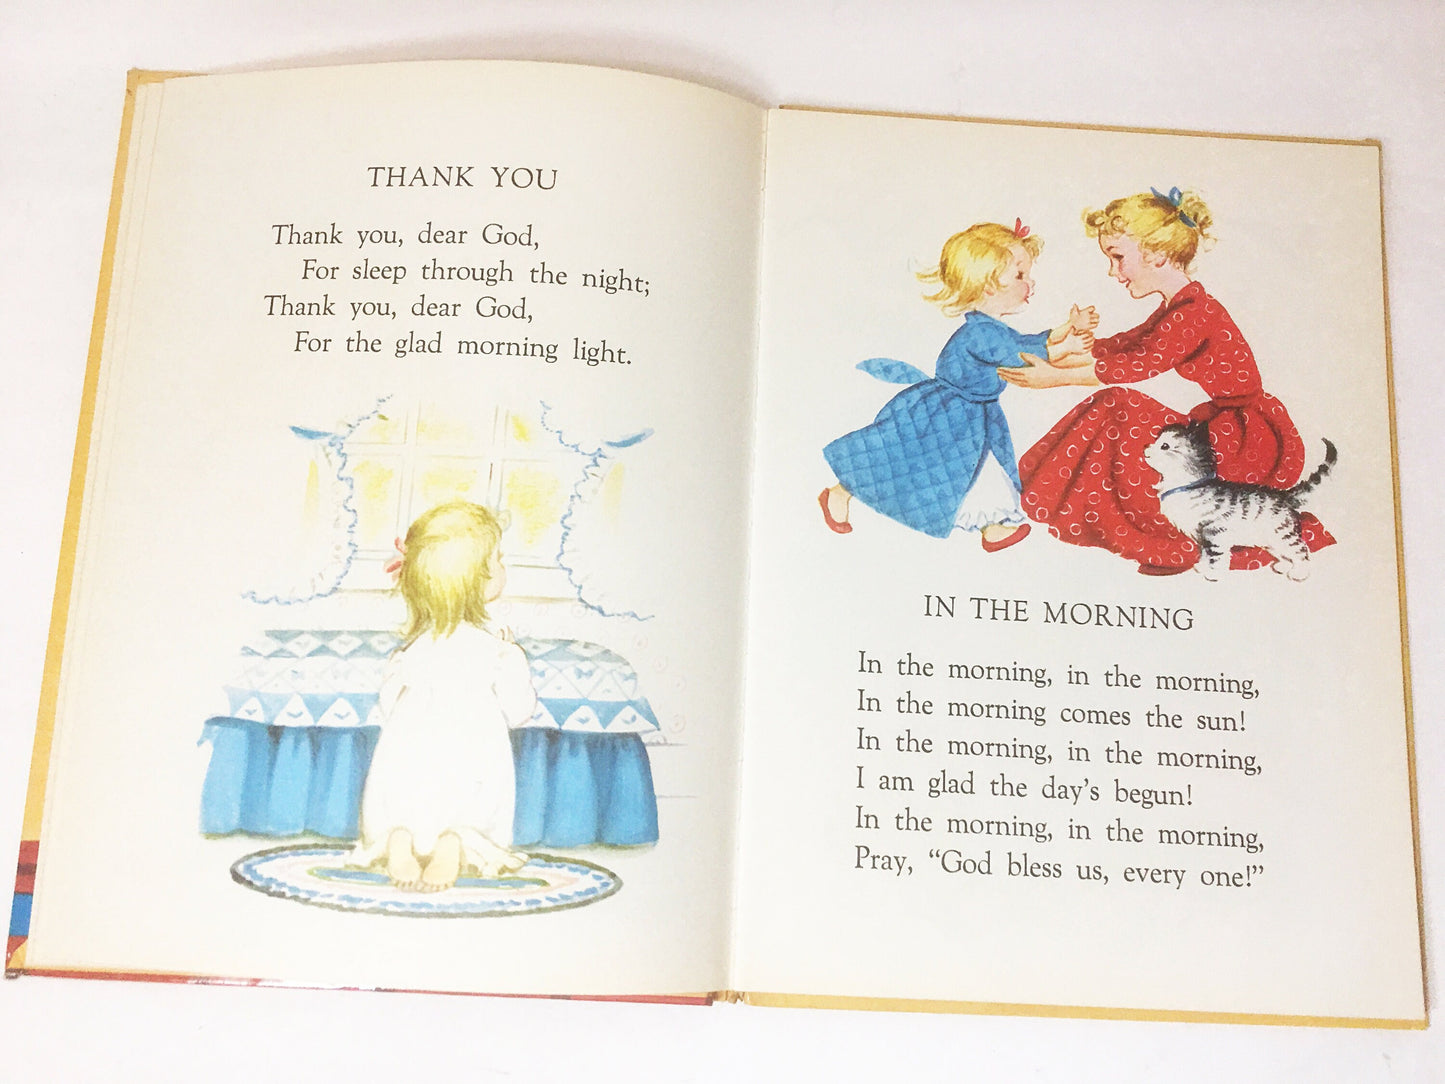 Prayers and Graces for a Small Child vintage Big Golden Book with Whimsical Illustrations circa 1959 Christian VG Condition